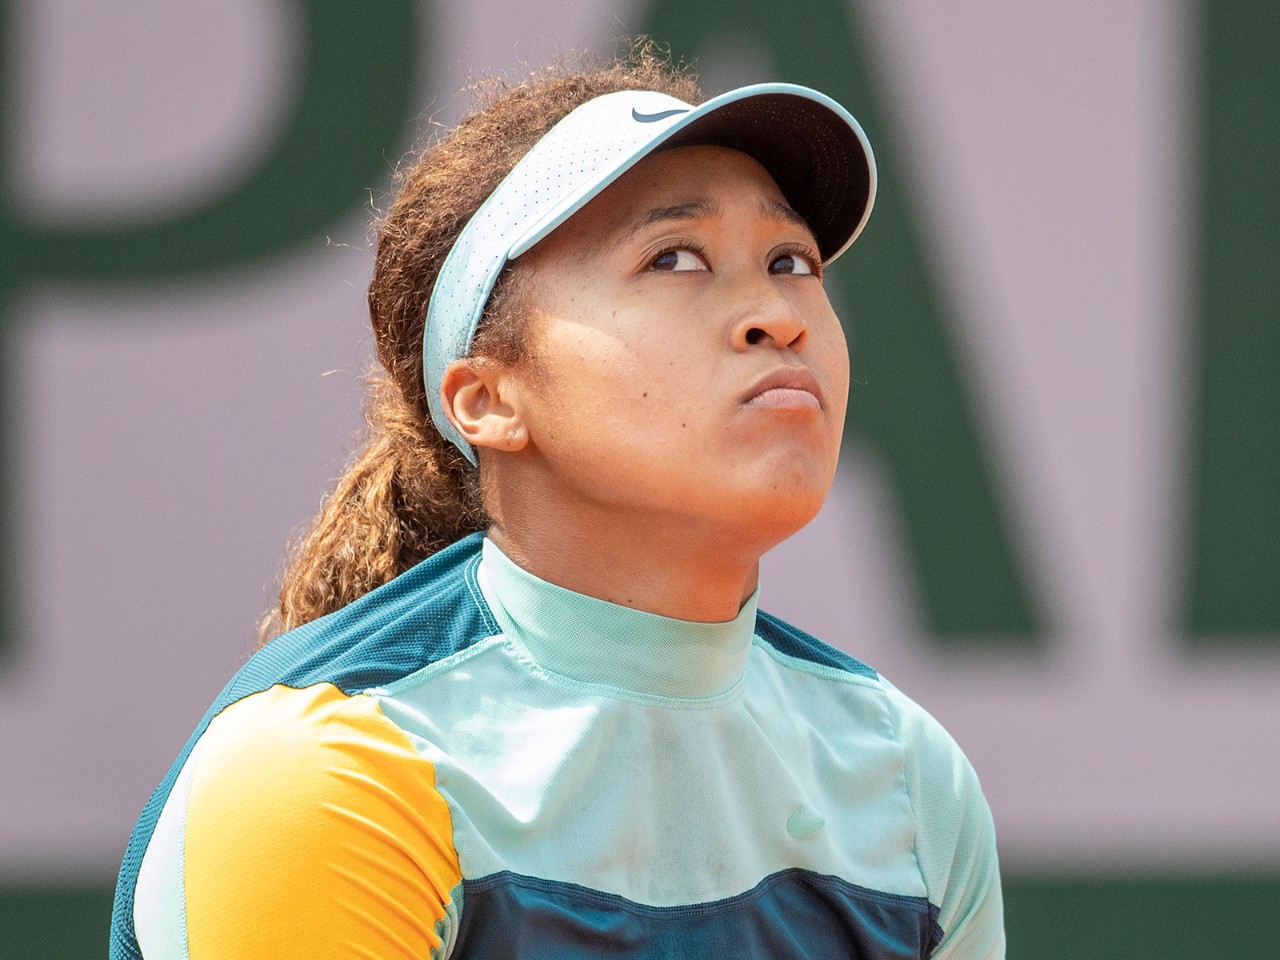 Naomi Osaka cited mental health concerns when she withdrew from the 2021 French Open tennis tournament